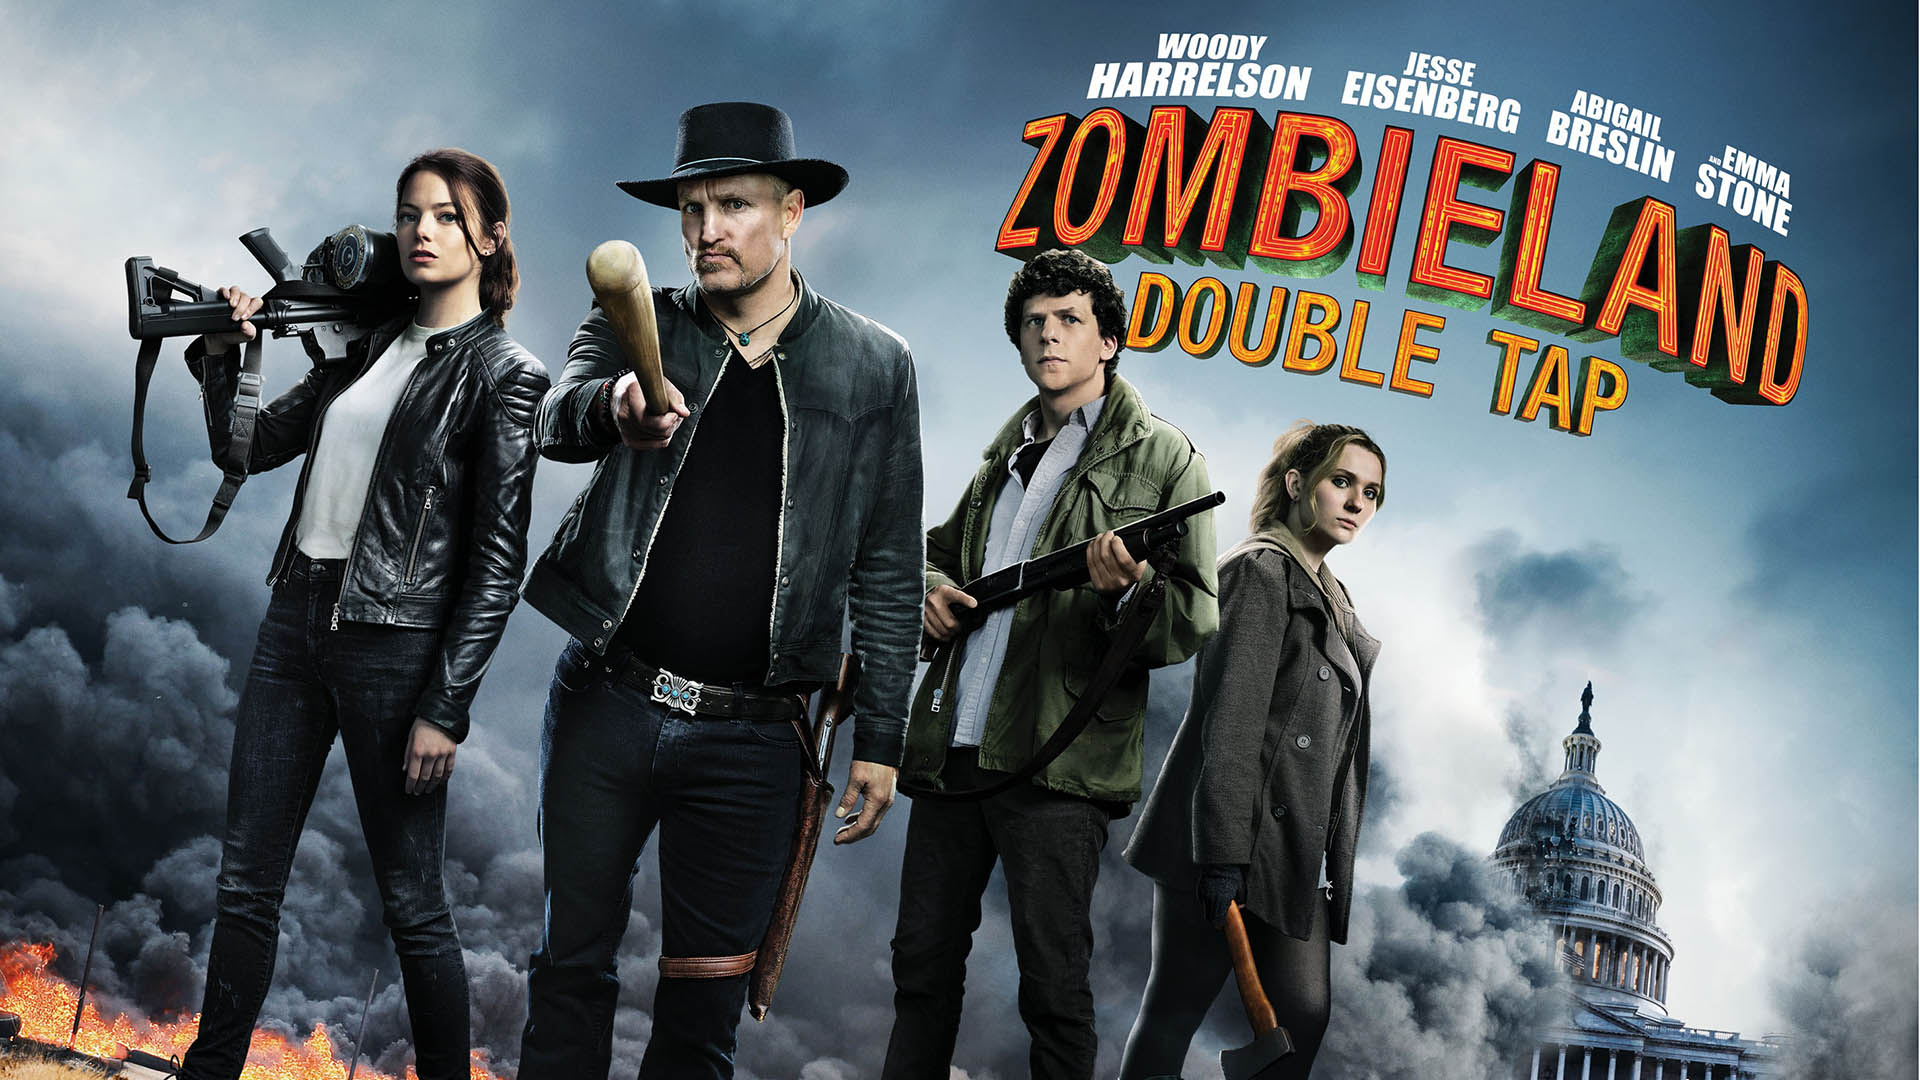 through comic mayhem that stretches from the White House and through the heartland, these four slayers must face off against the many new kinds of zombies that have evolved since the first movie, as well as some new human survivors.